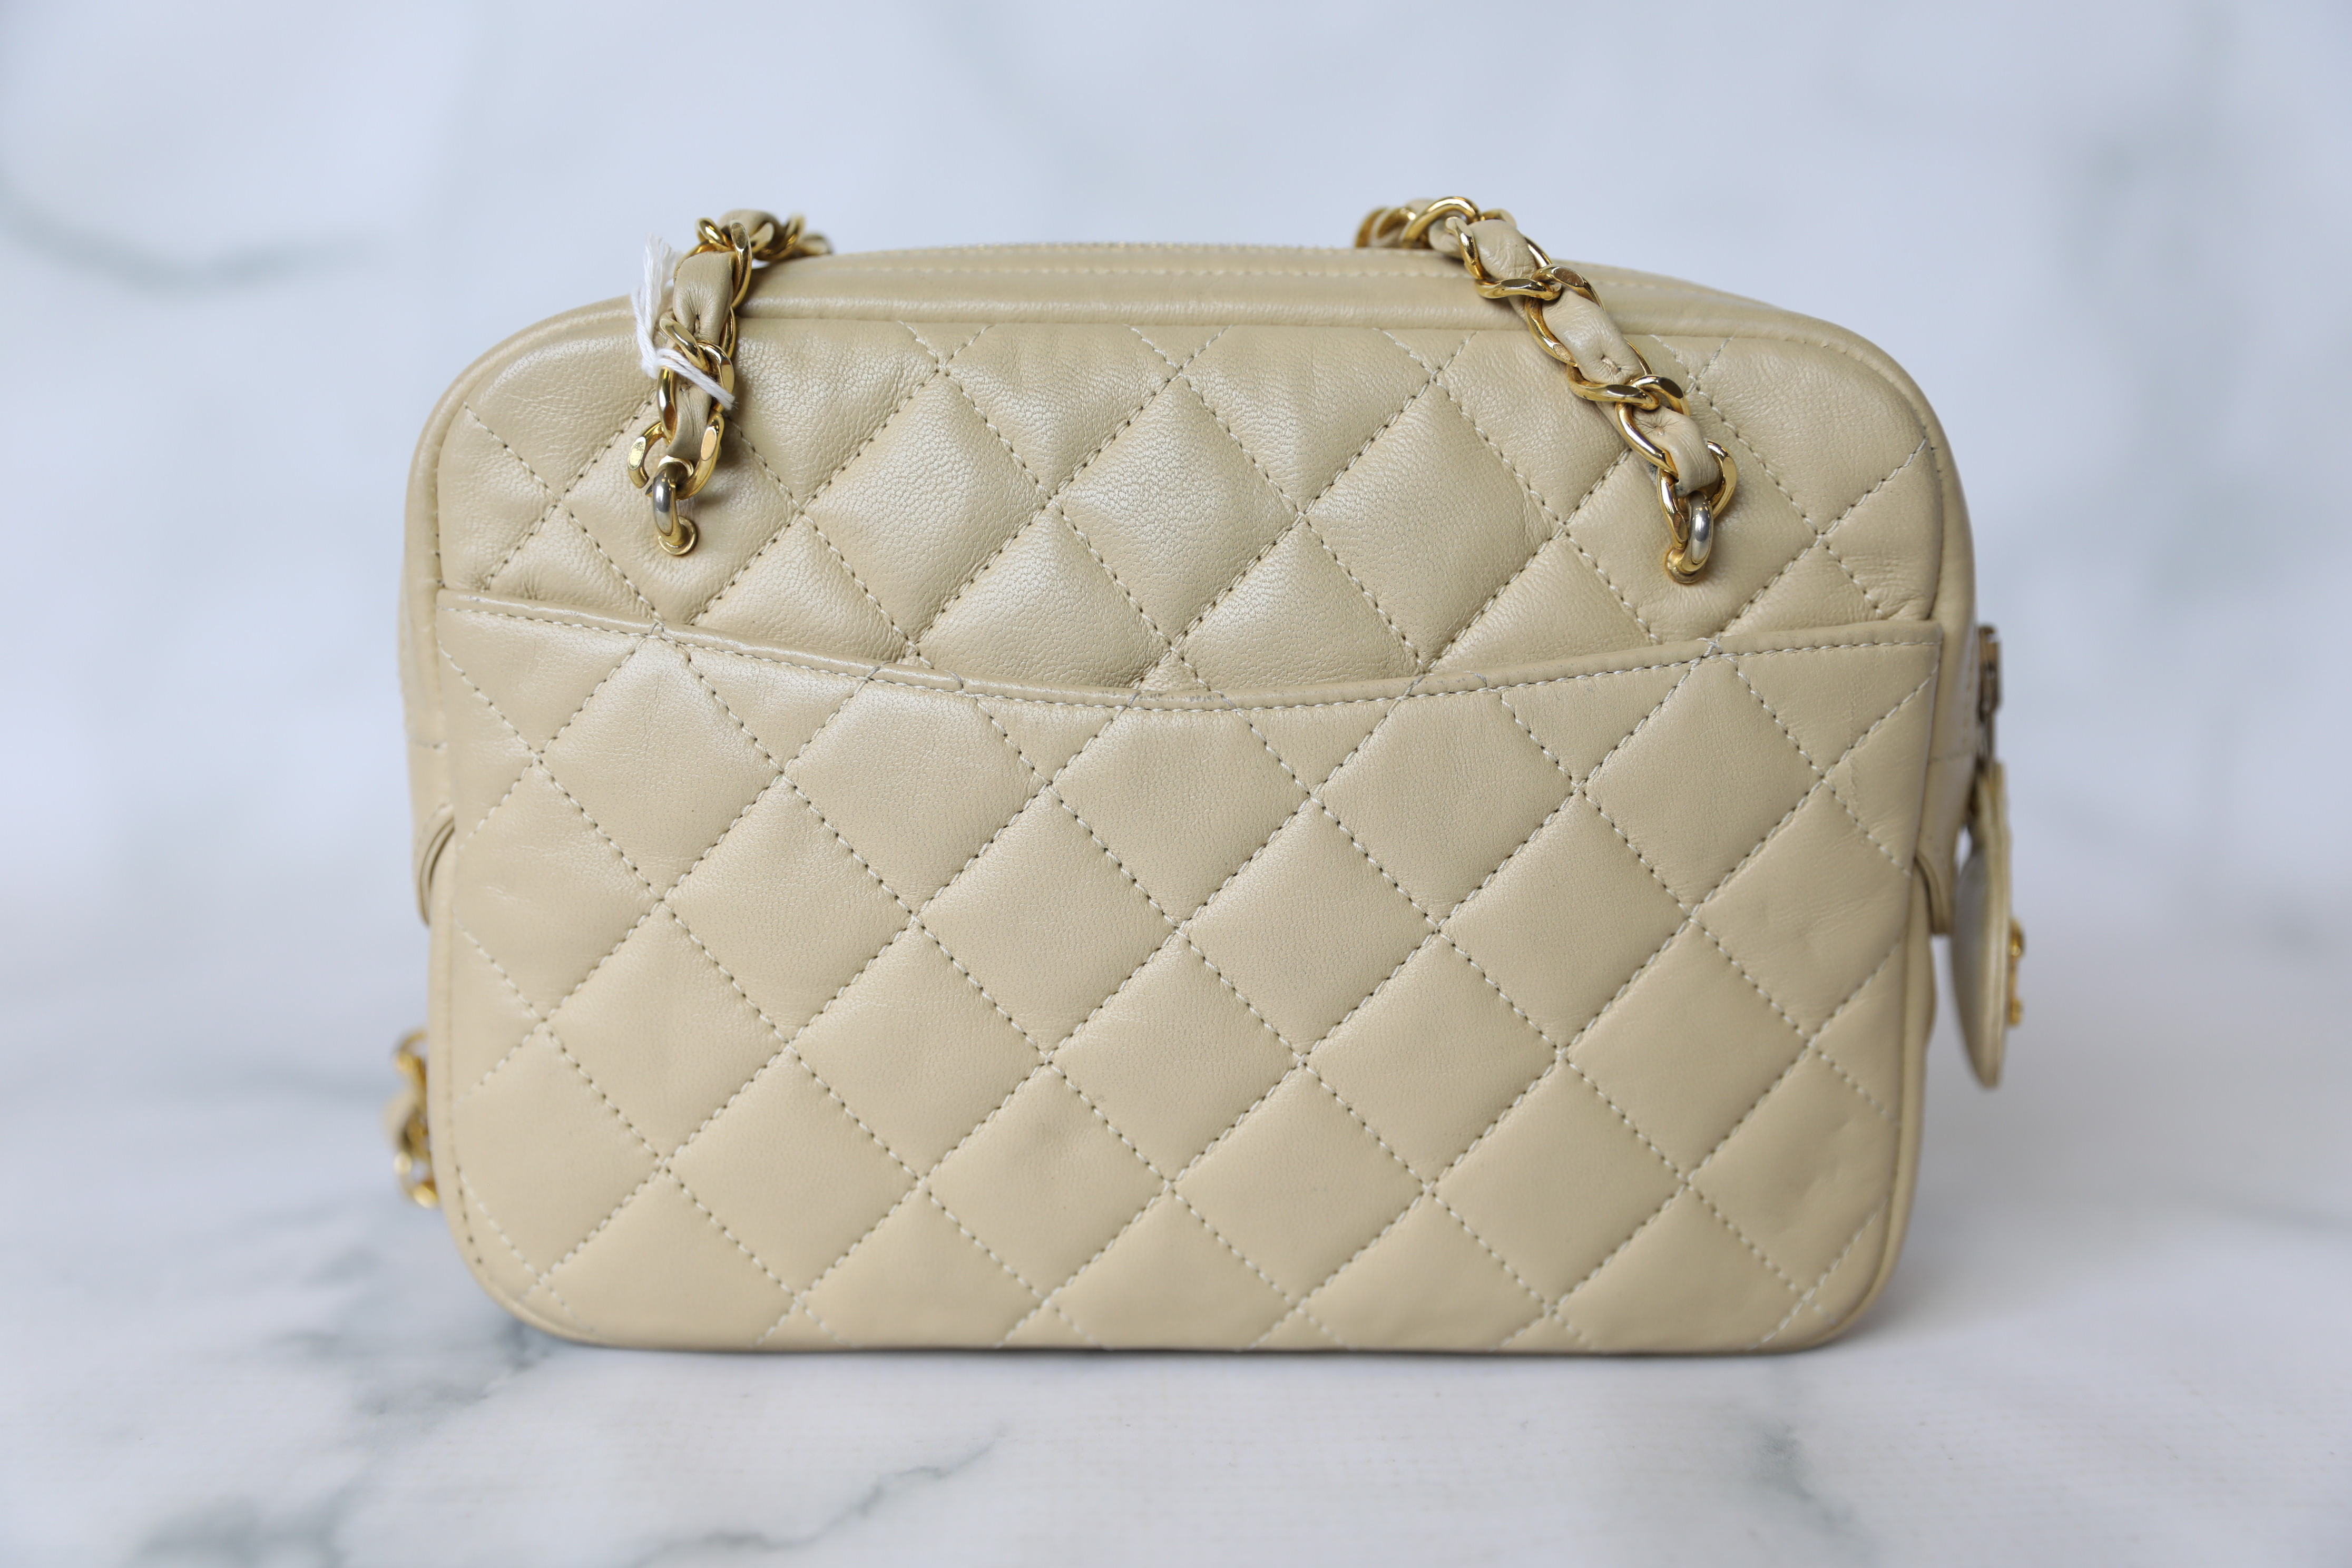 Chanel Vintage Camera Bag, Beige Lambskin with Gold Hardware, Preowned in  Box WA001 - Julia Rose Boston